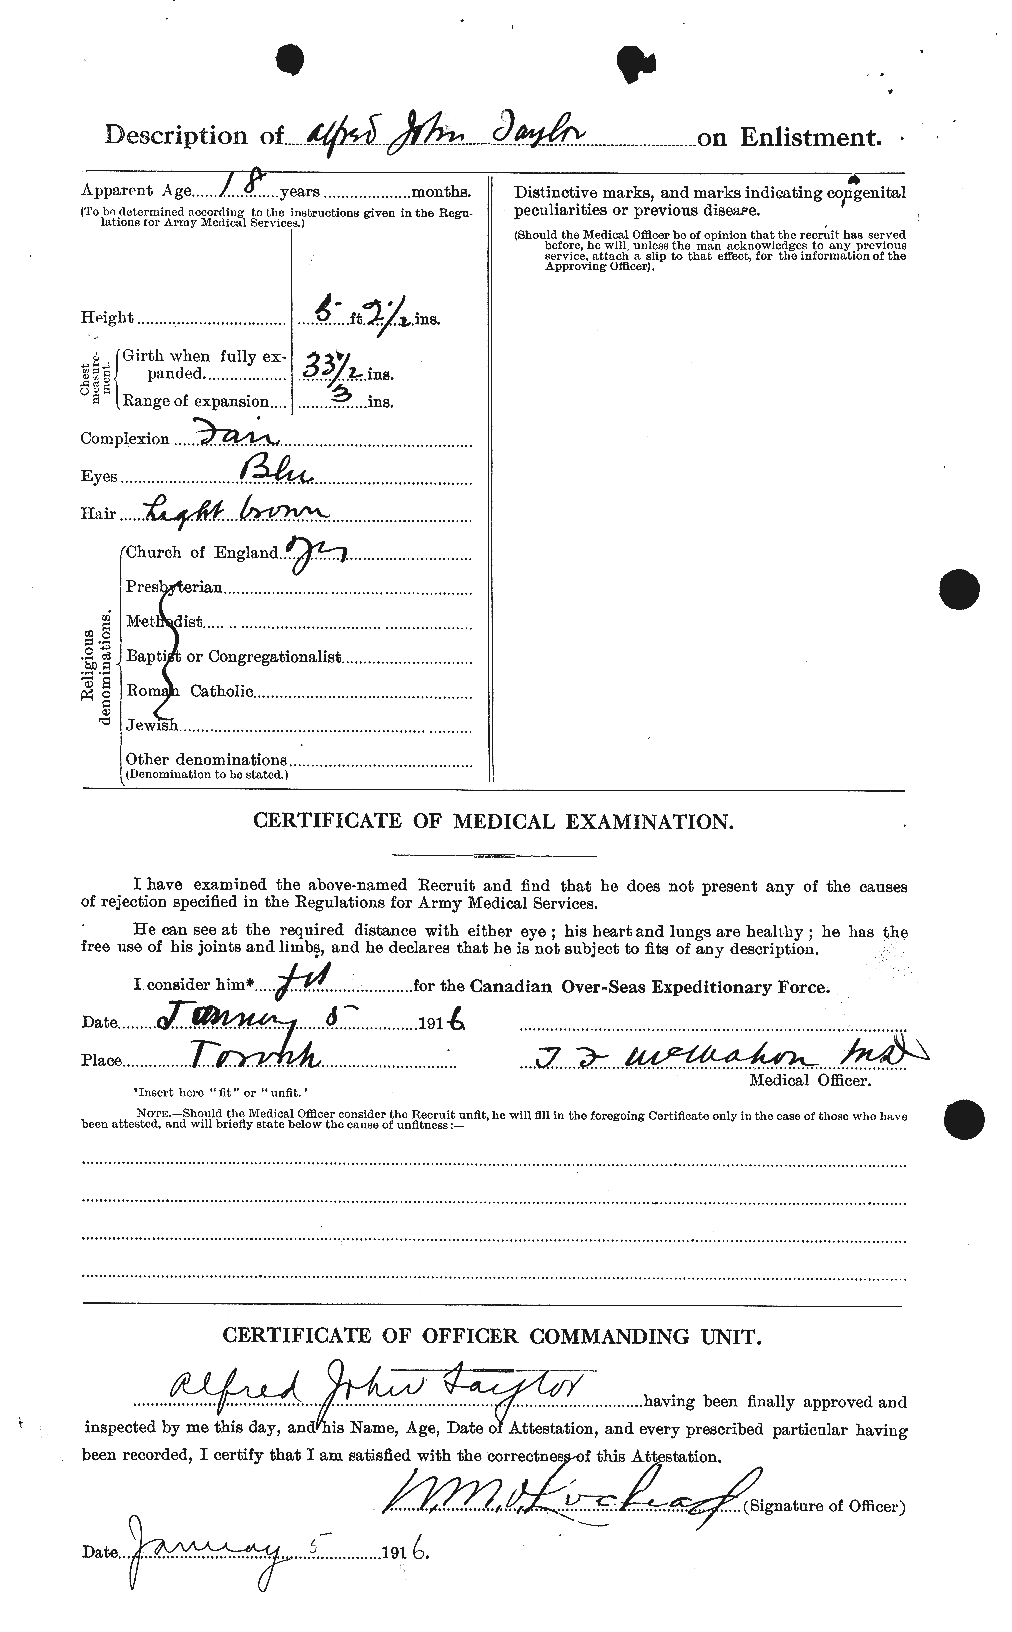 Personnel Records of the First World War - CEF 626188b